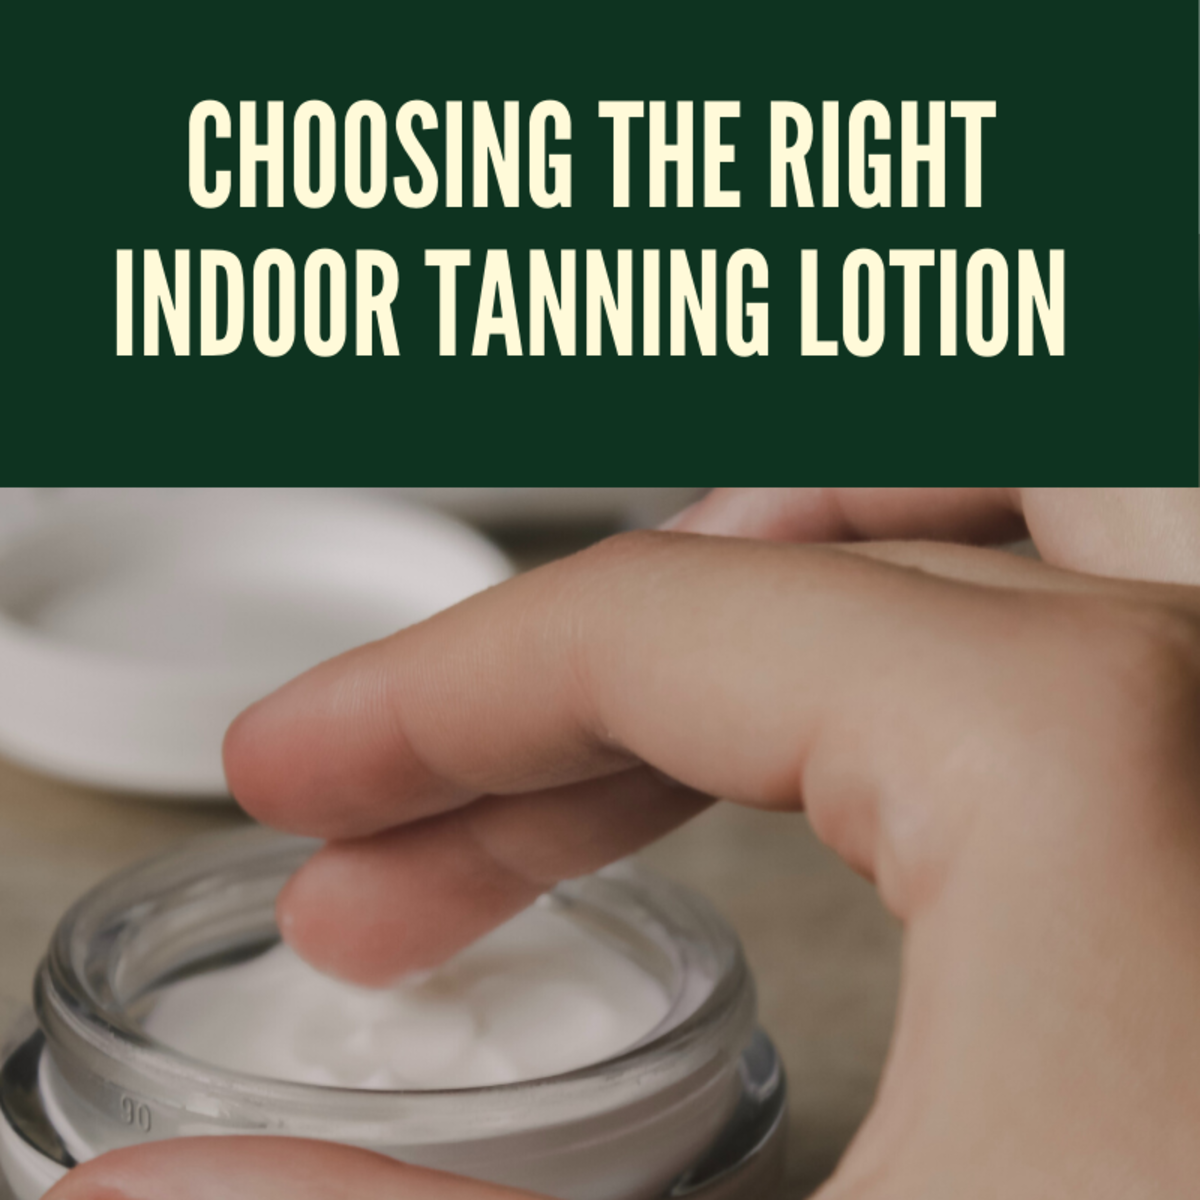 Choosing the perfect tanning lotion can be a bit confusing. Read on to learn how to make the right choice.